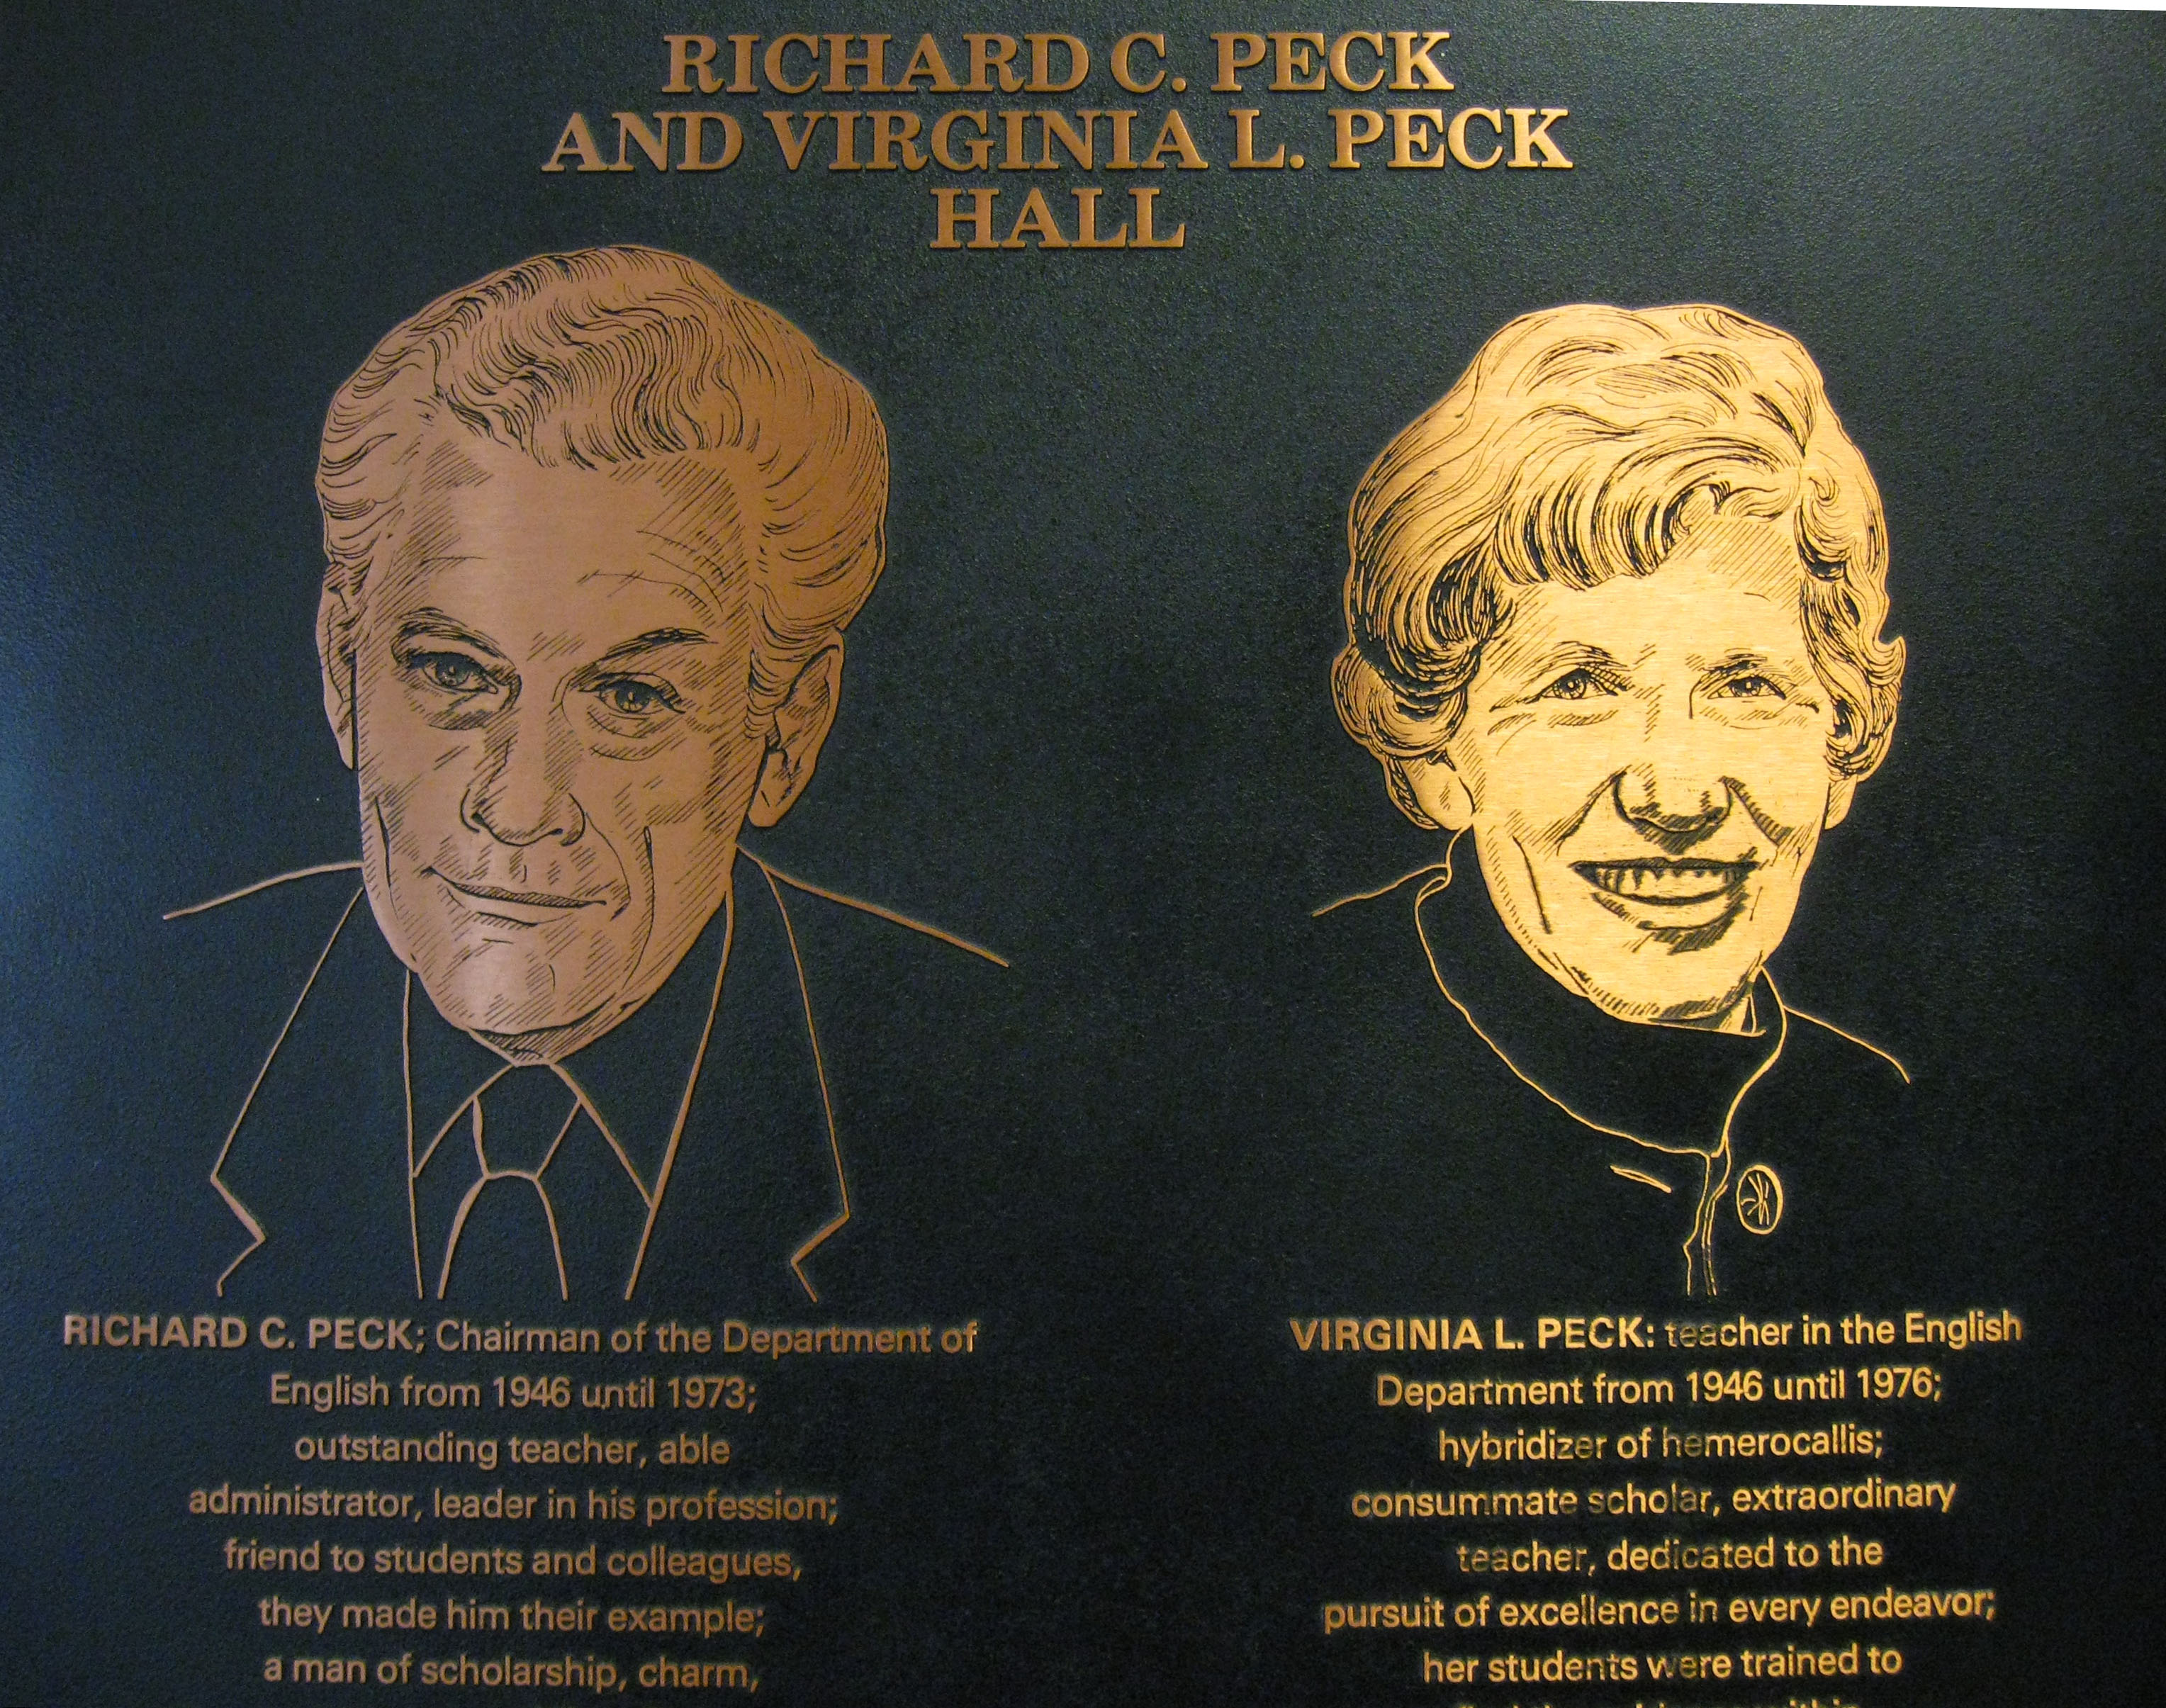 Placque of the Pecks in Peck Hall